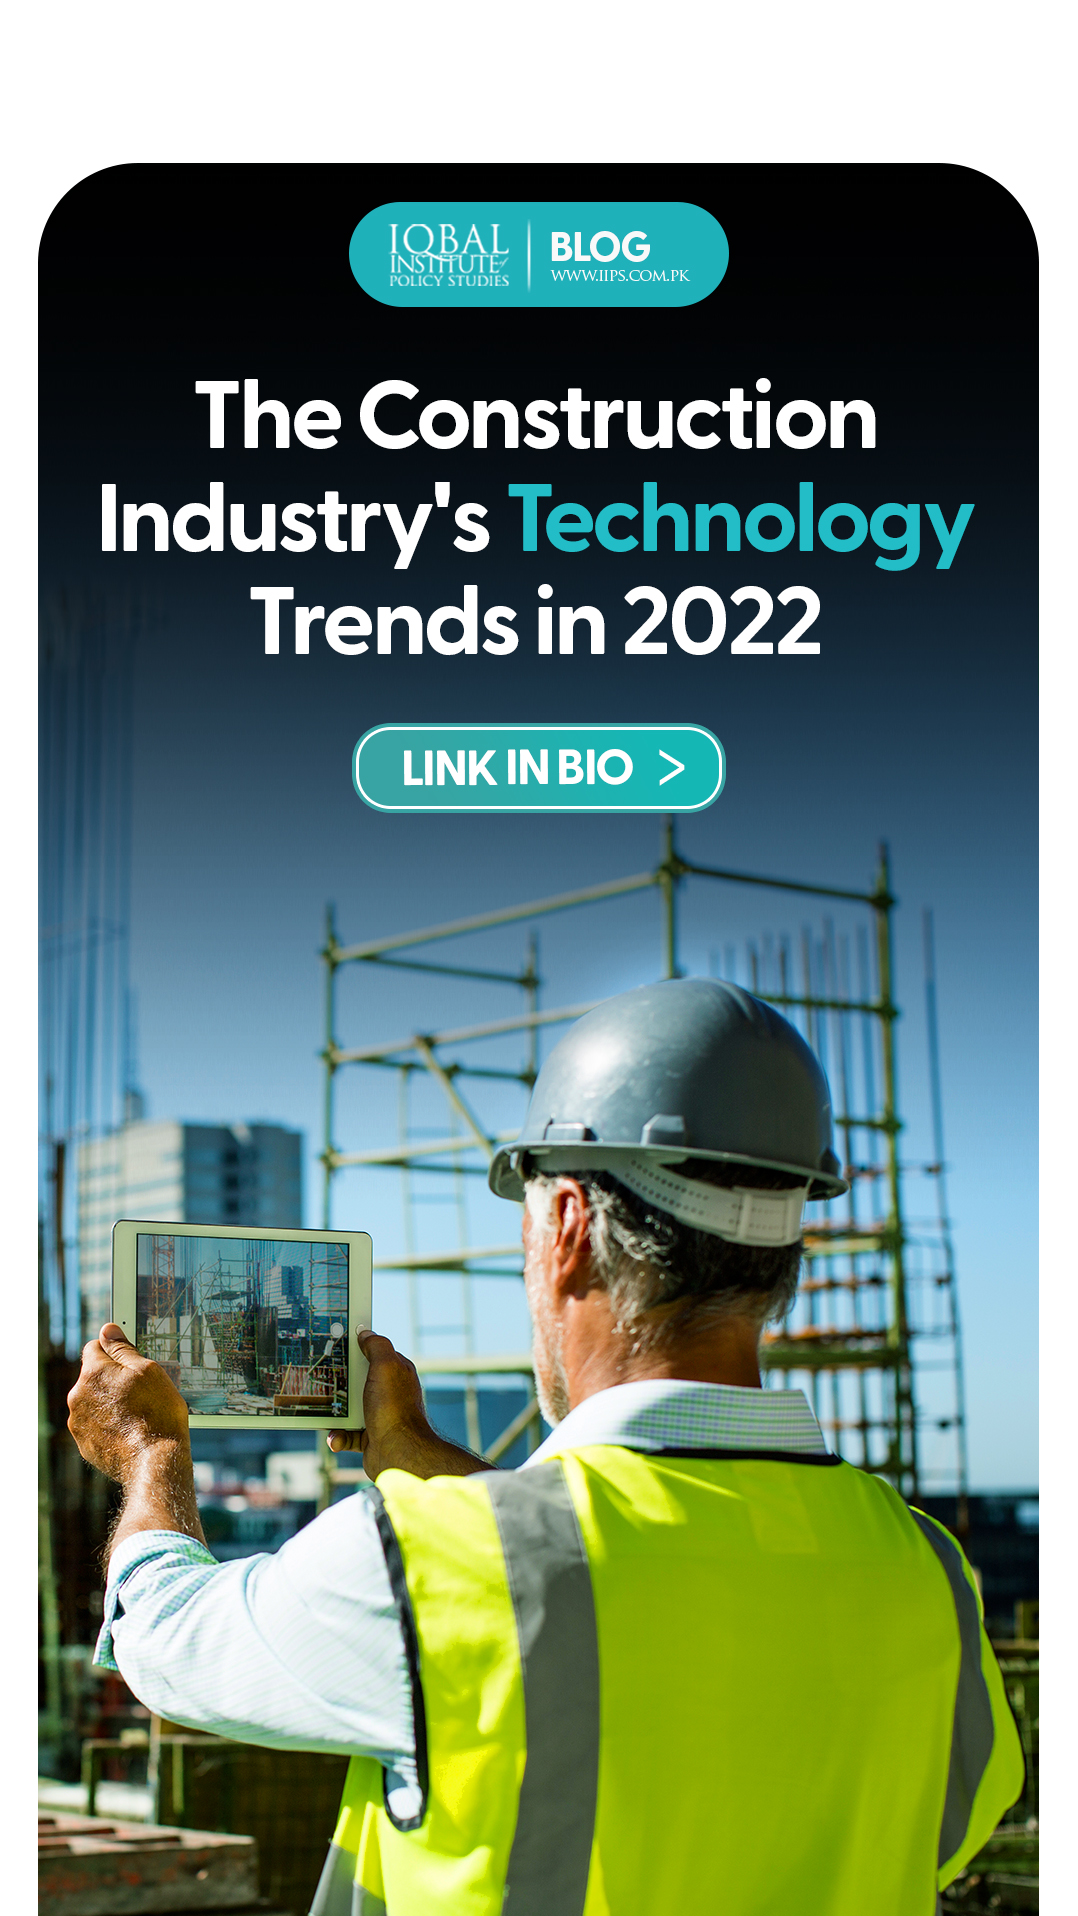 the construction industry's technology trends in 2022